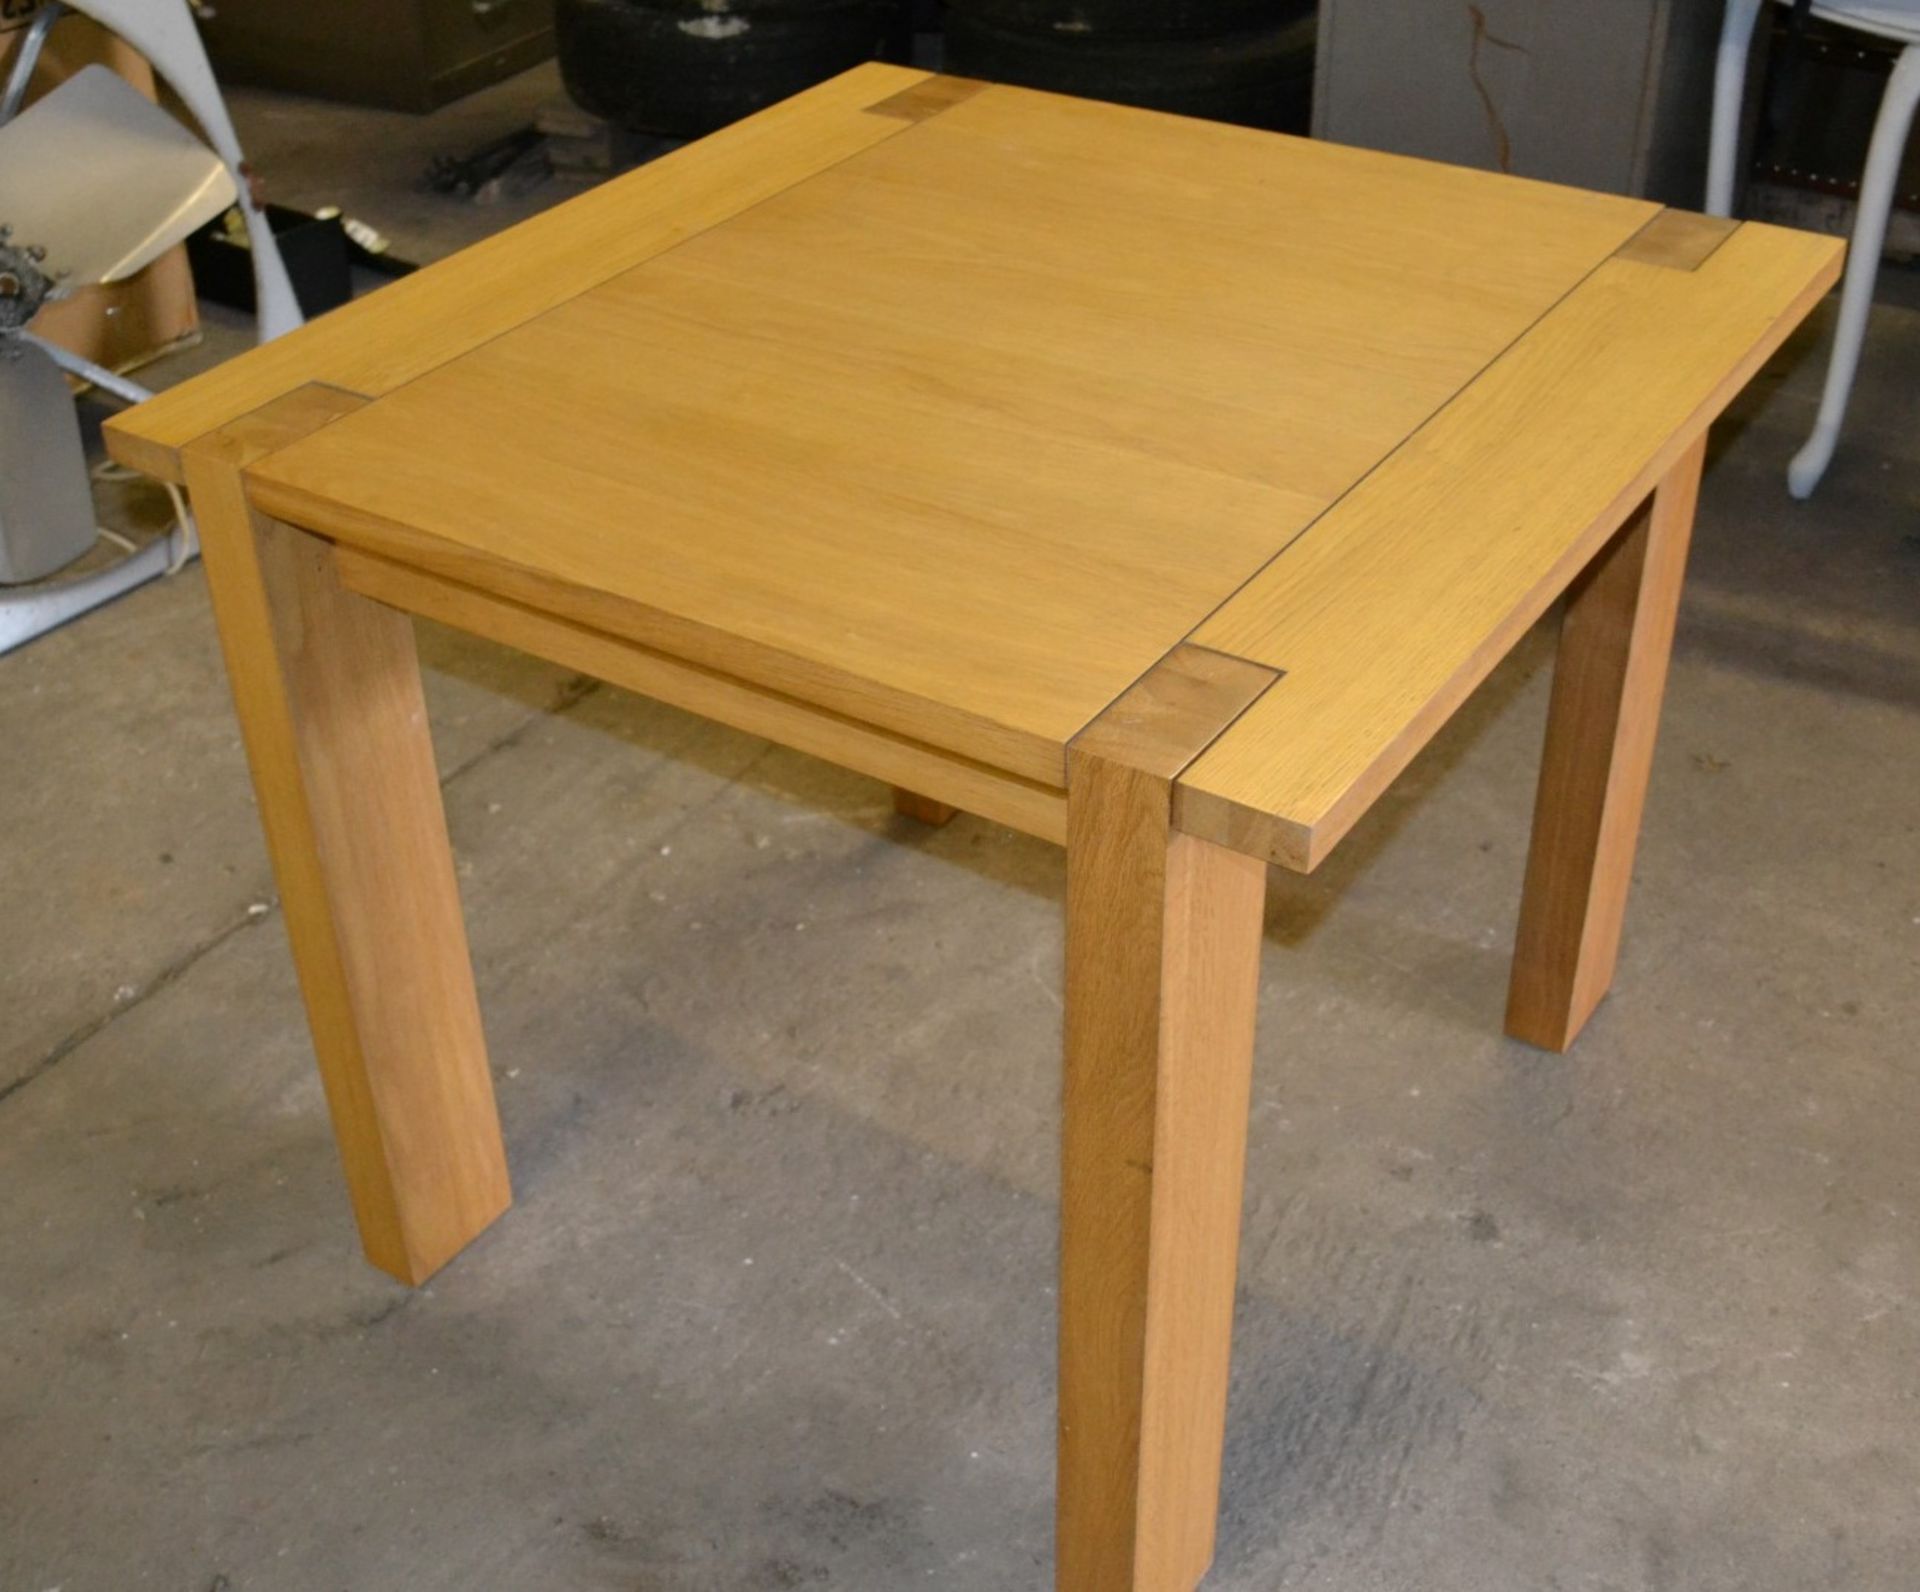 1 x Sturdy Square Wooden Table - Dimensions: 90 x 90 x 76cm - Ref: IT554 - CL403 - Location: - Image 2 of 3